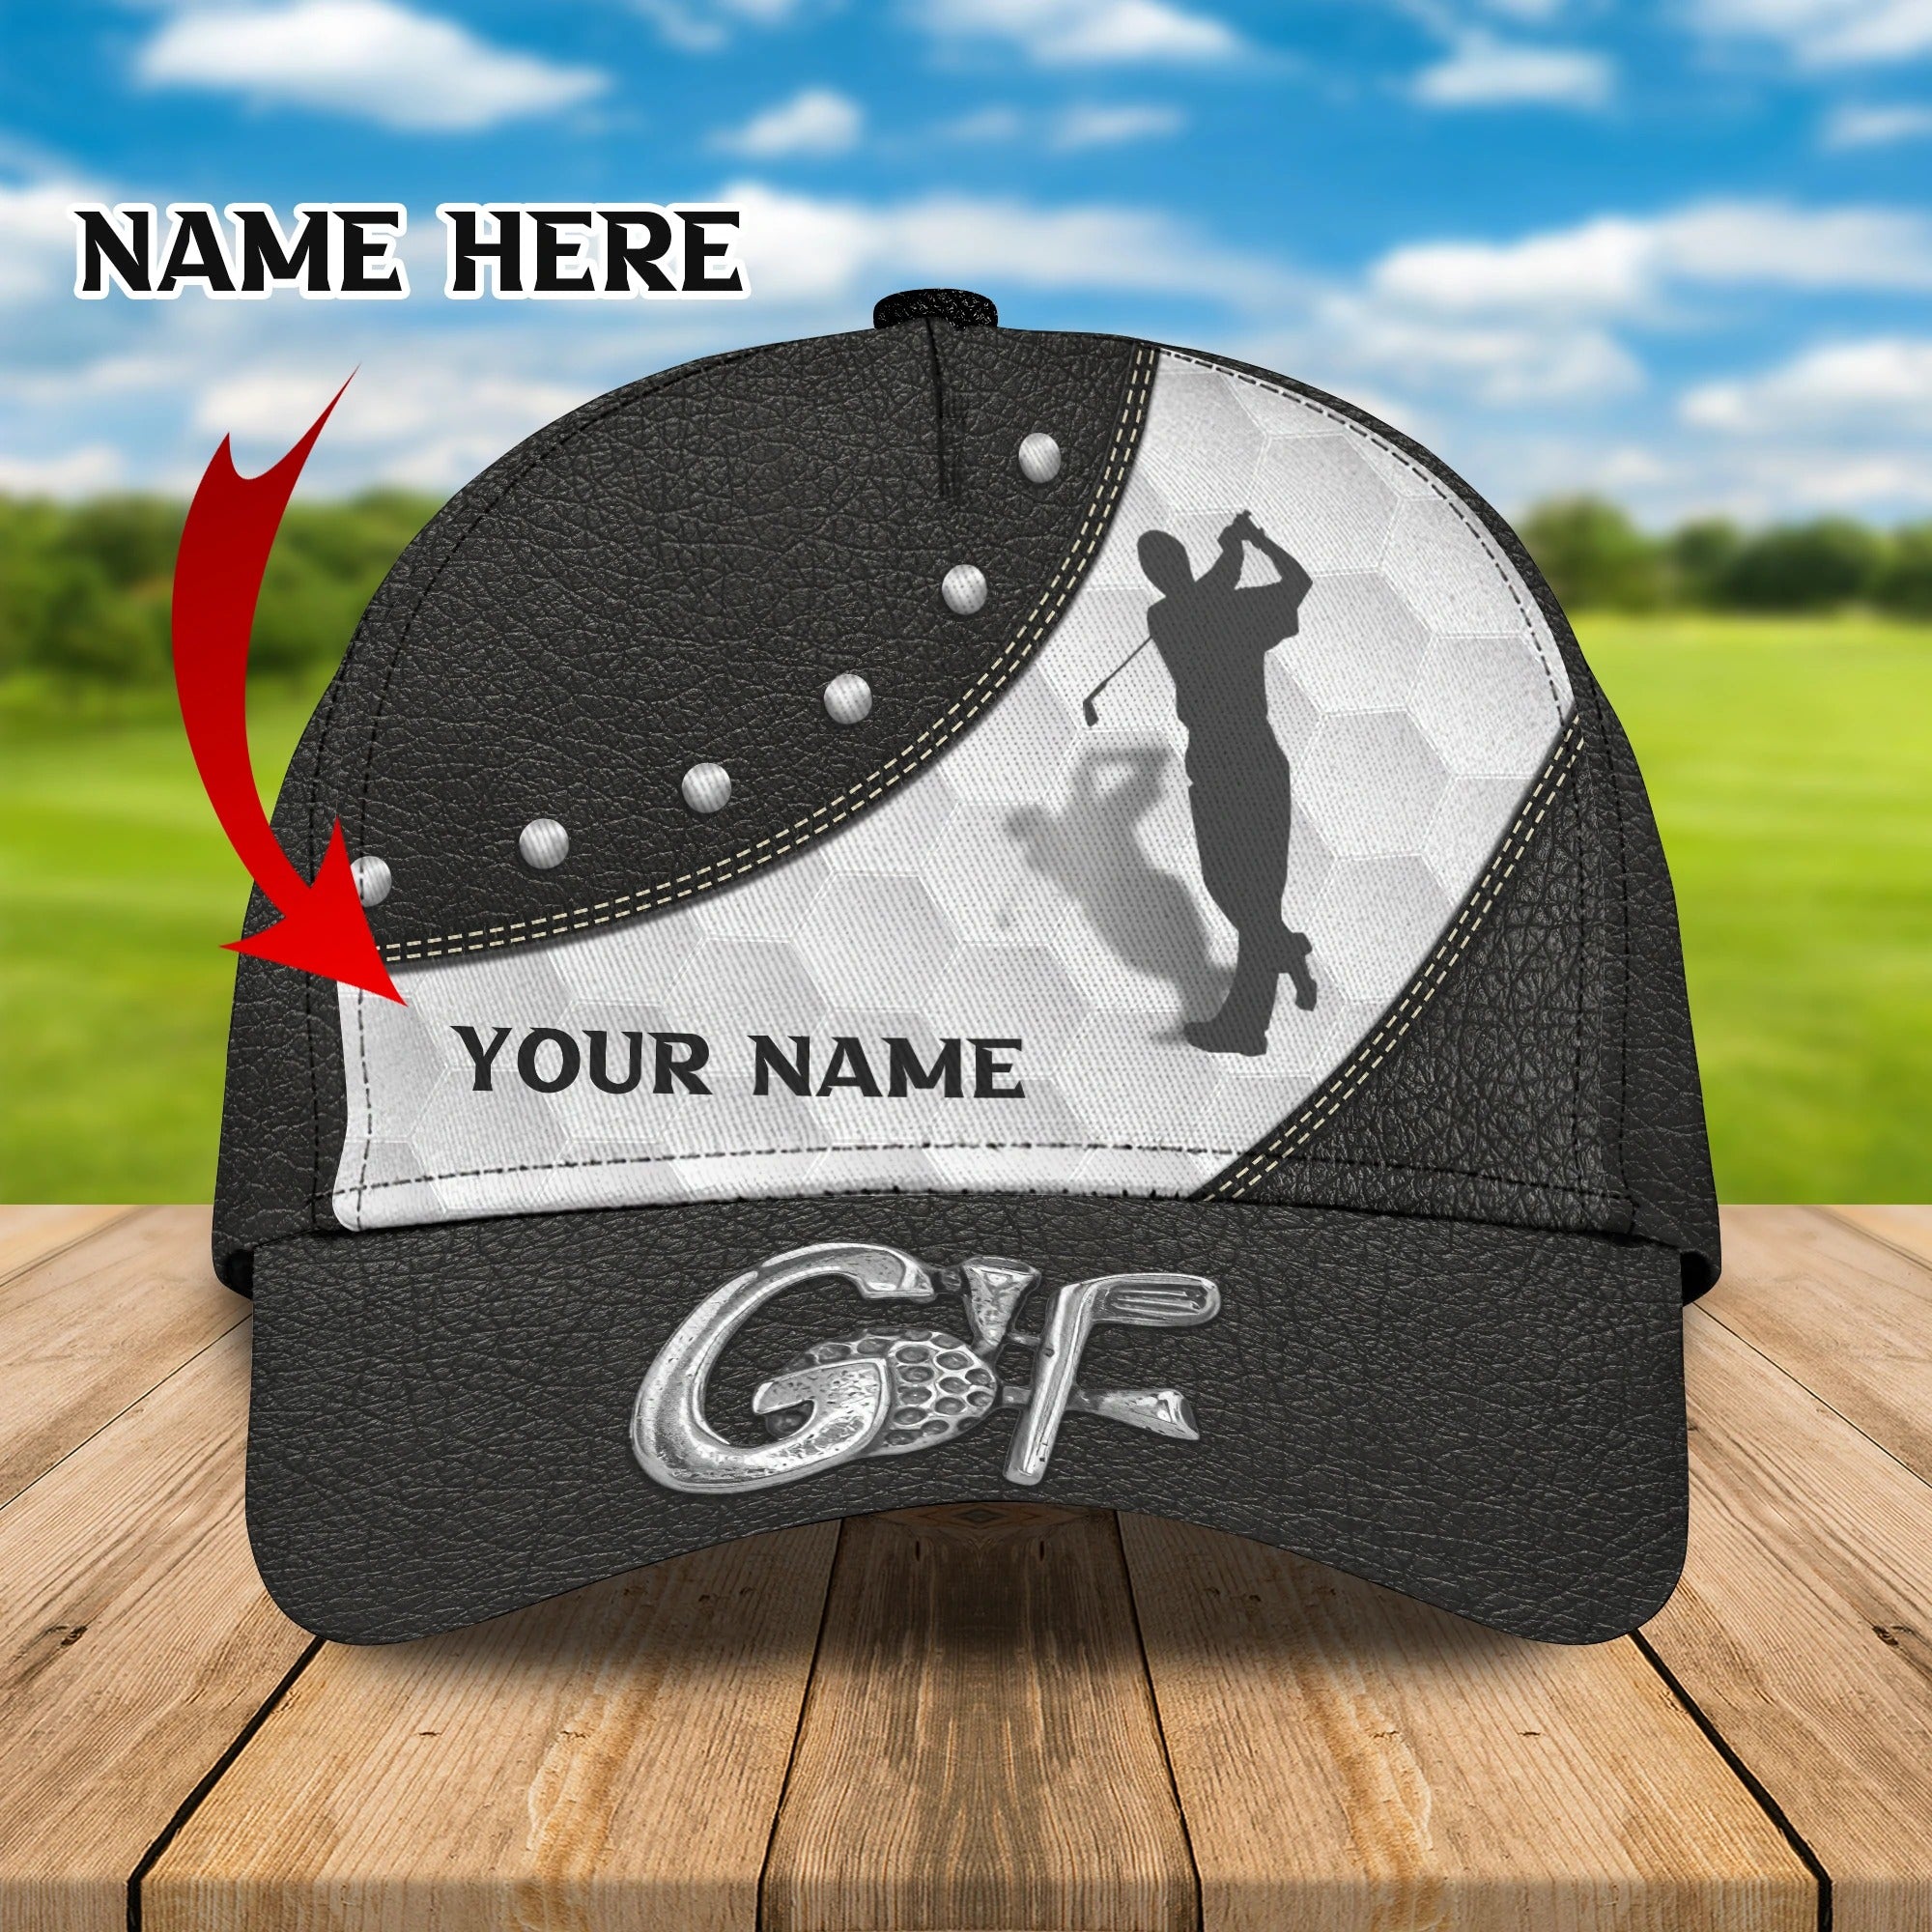 Customized Cap For Golfer, Golf Womans Cap, Classic Cap For Golf Lover, Christmas Golfer Gifts